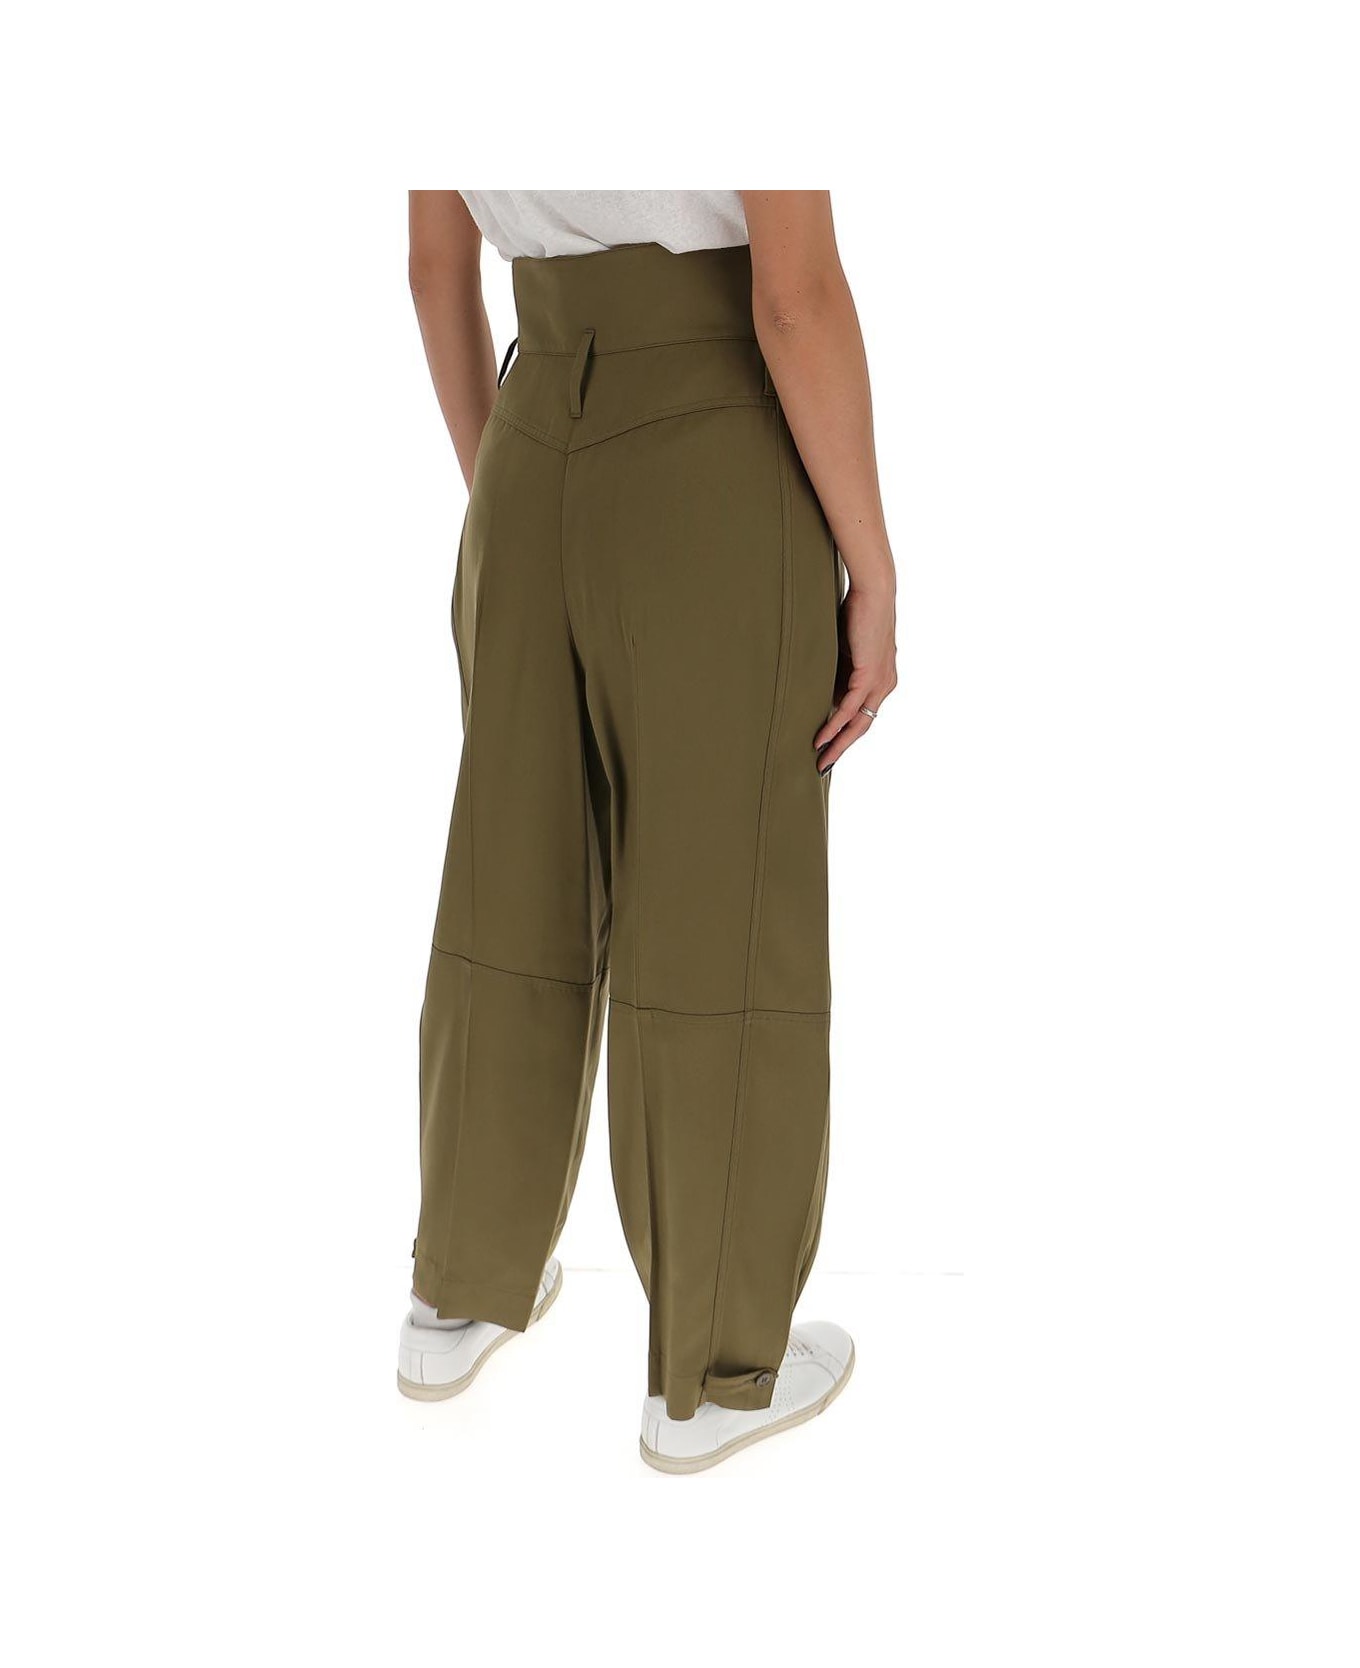 Givenchy High Waisted Military Trousers - BROWN